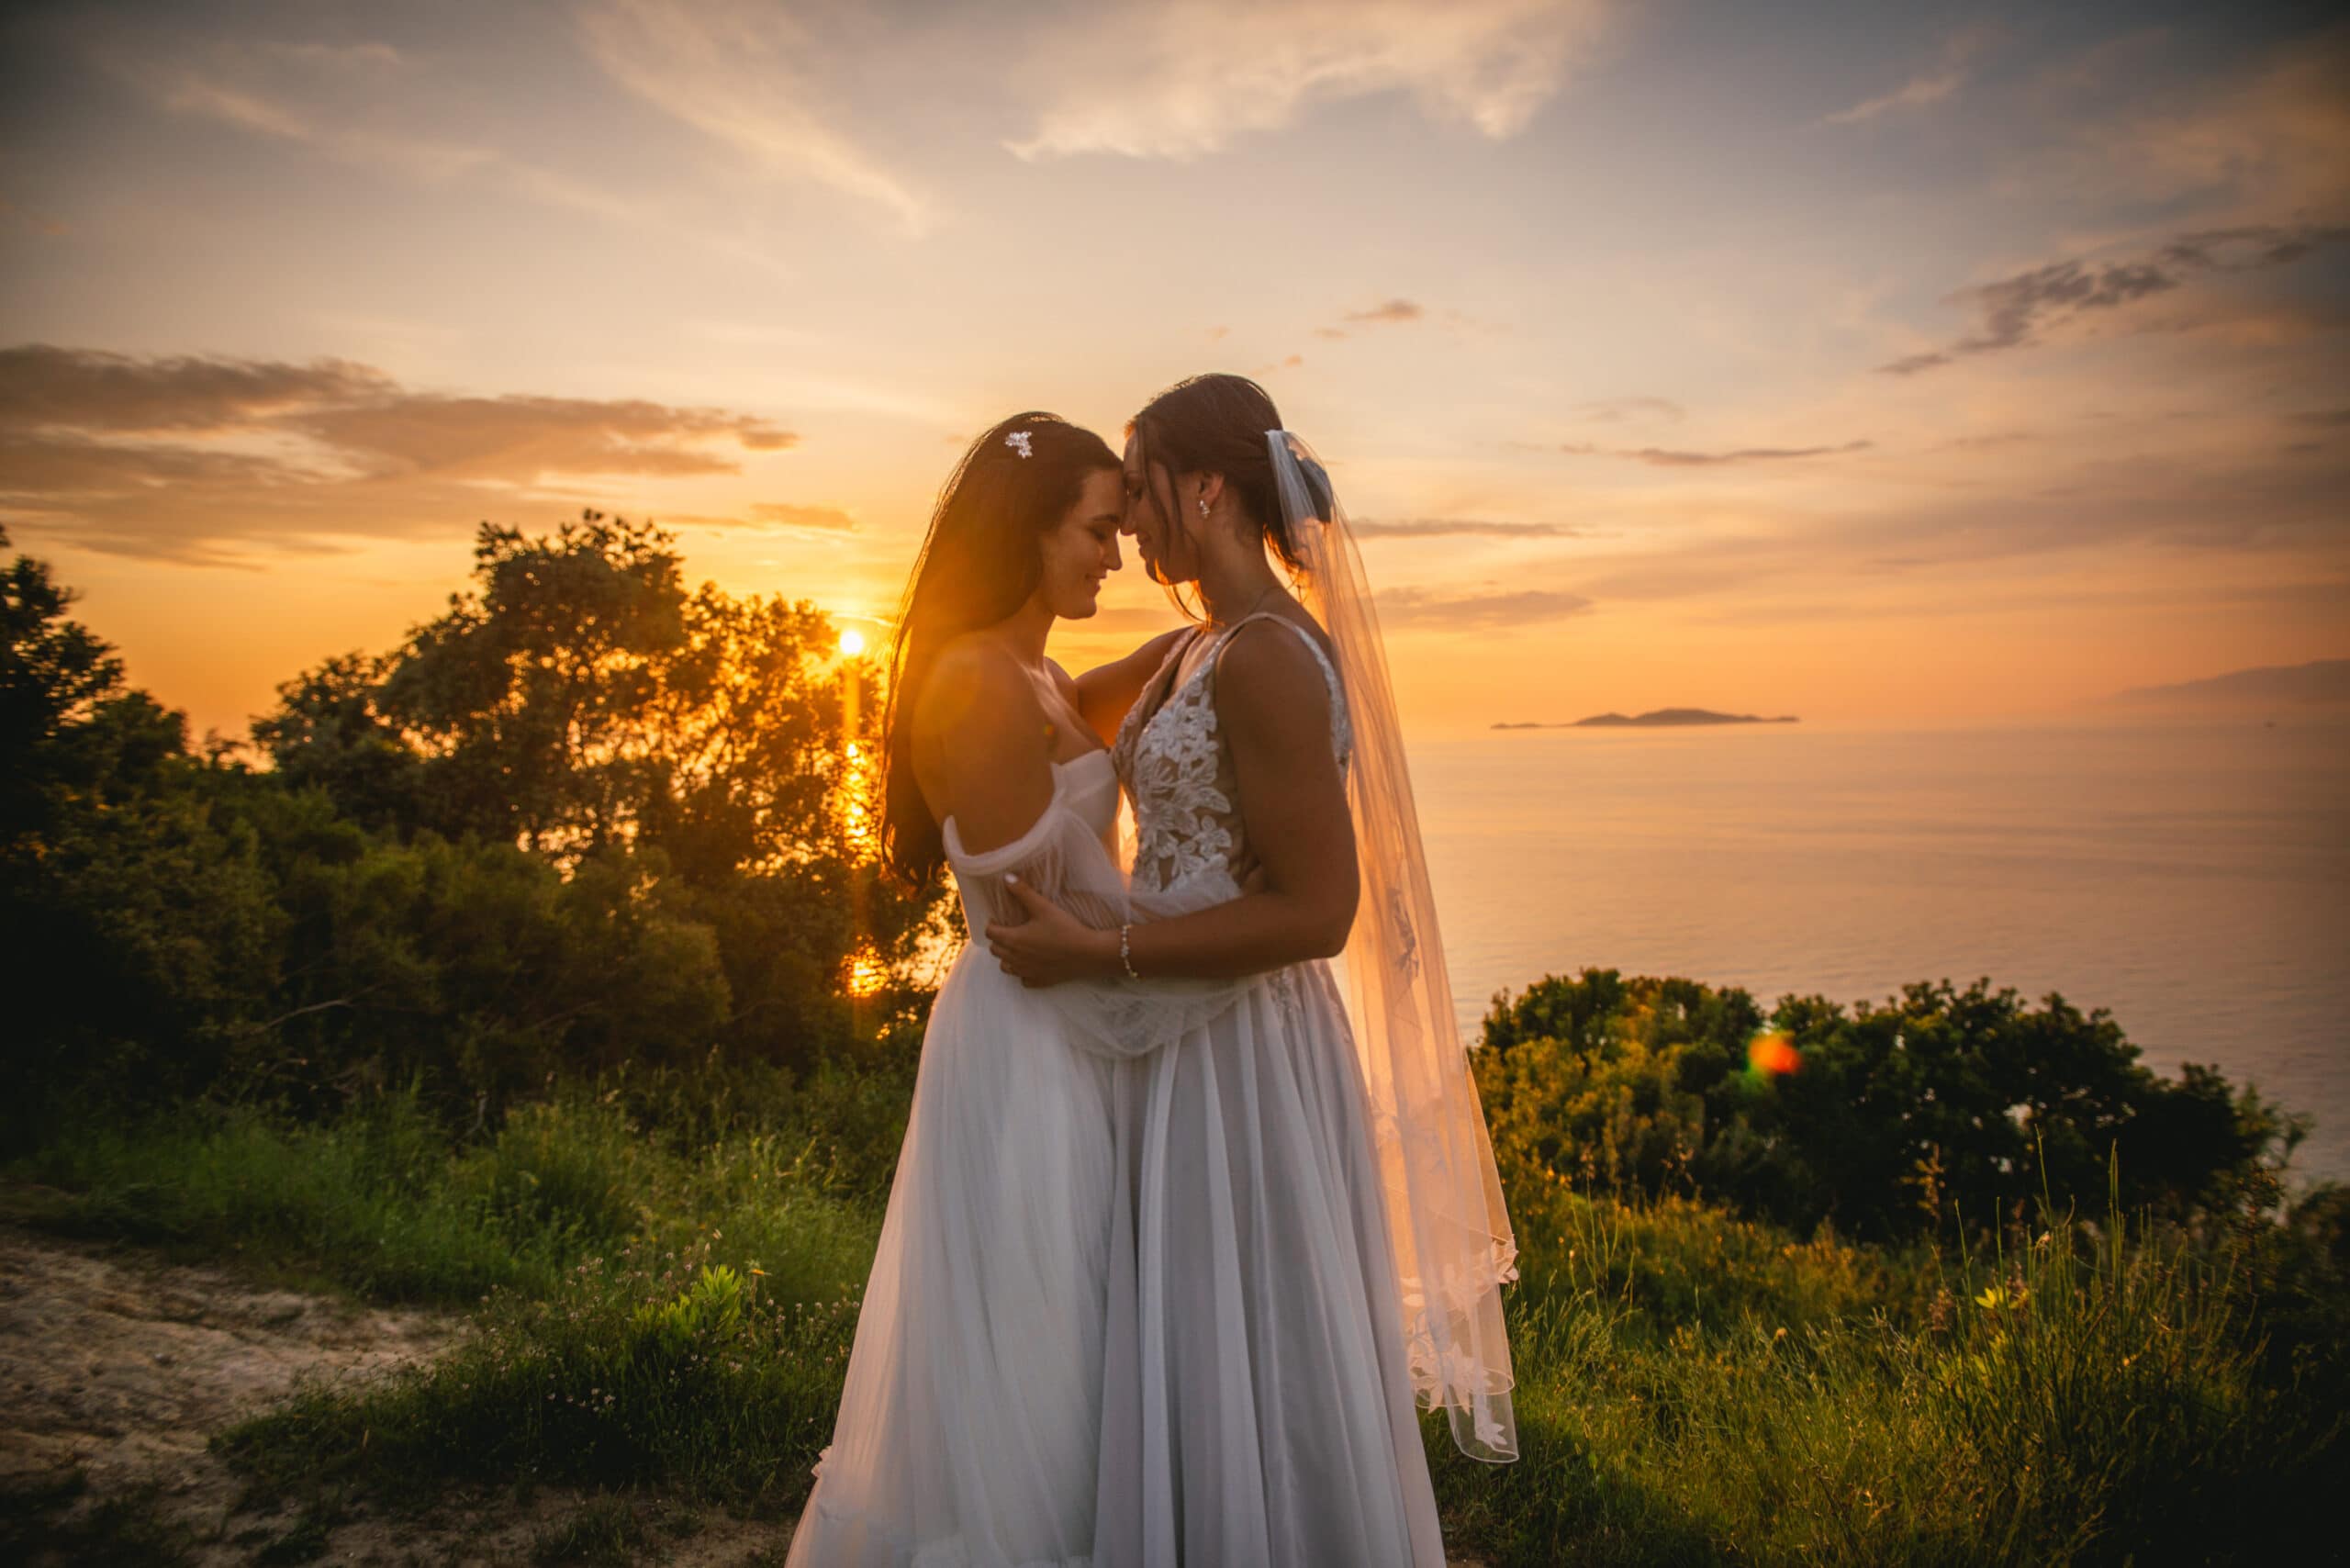 Bride's dance during sunset's embrace, capturing their Corfu elopement magic.